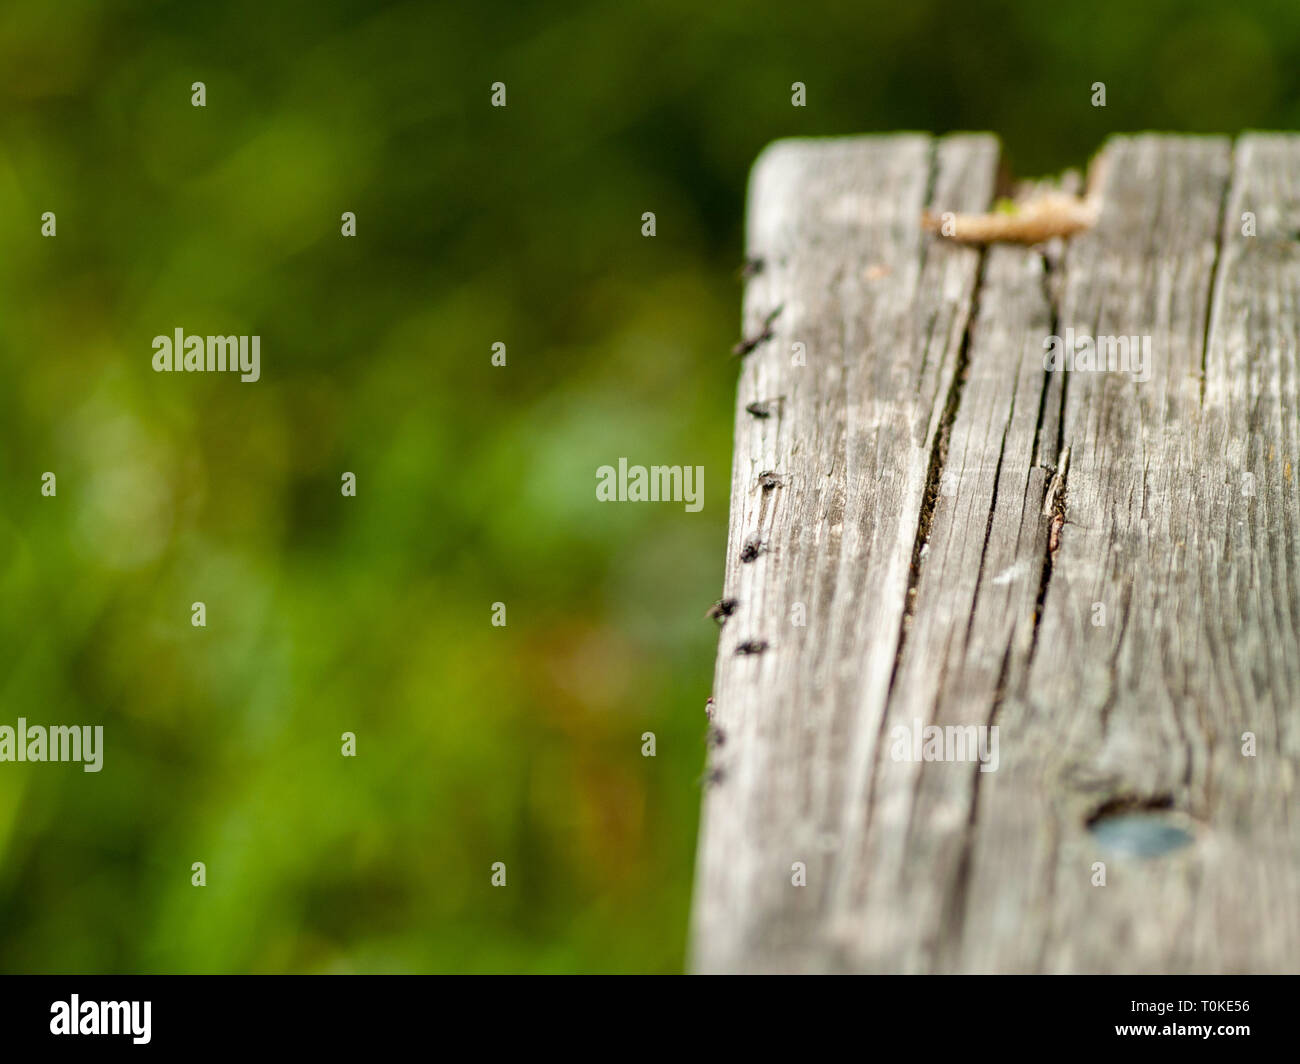 Flies perched on an old wooden board Stock Photo